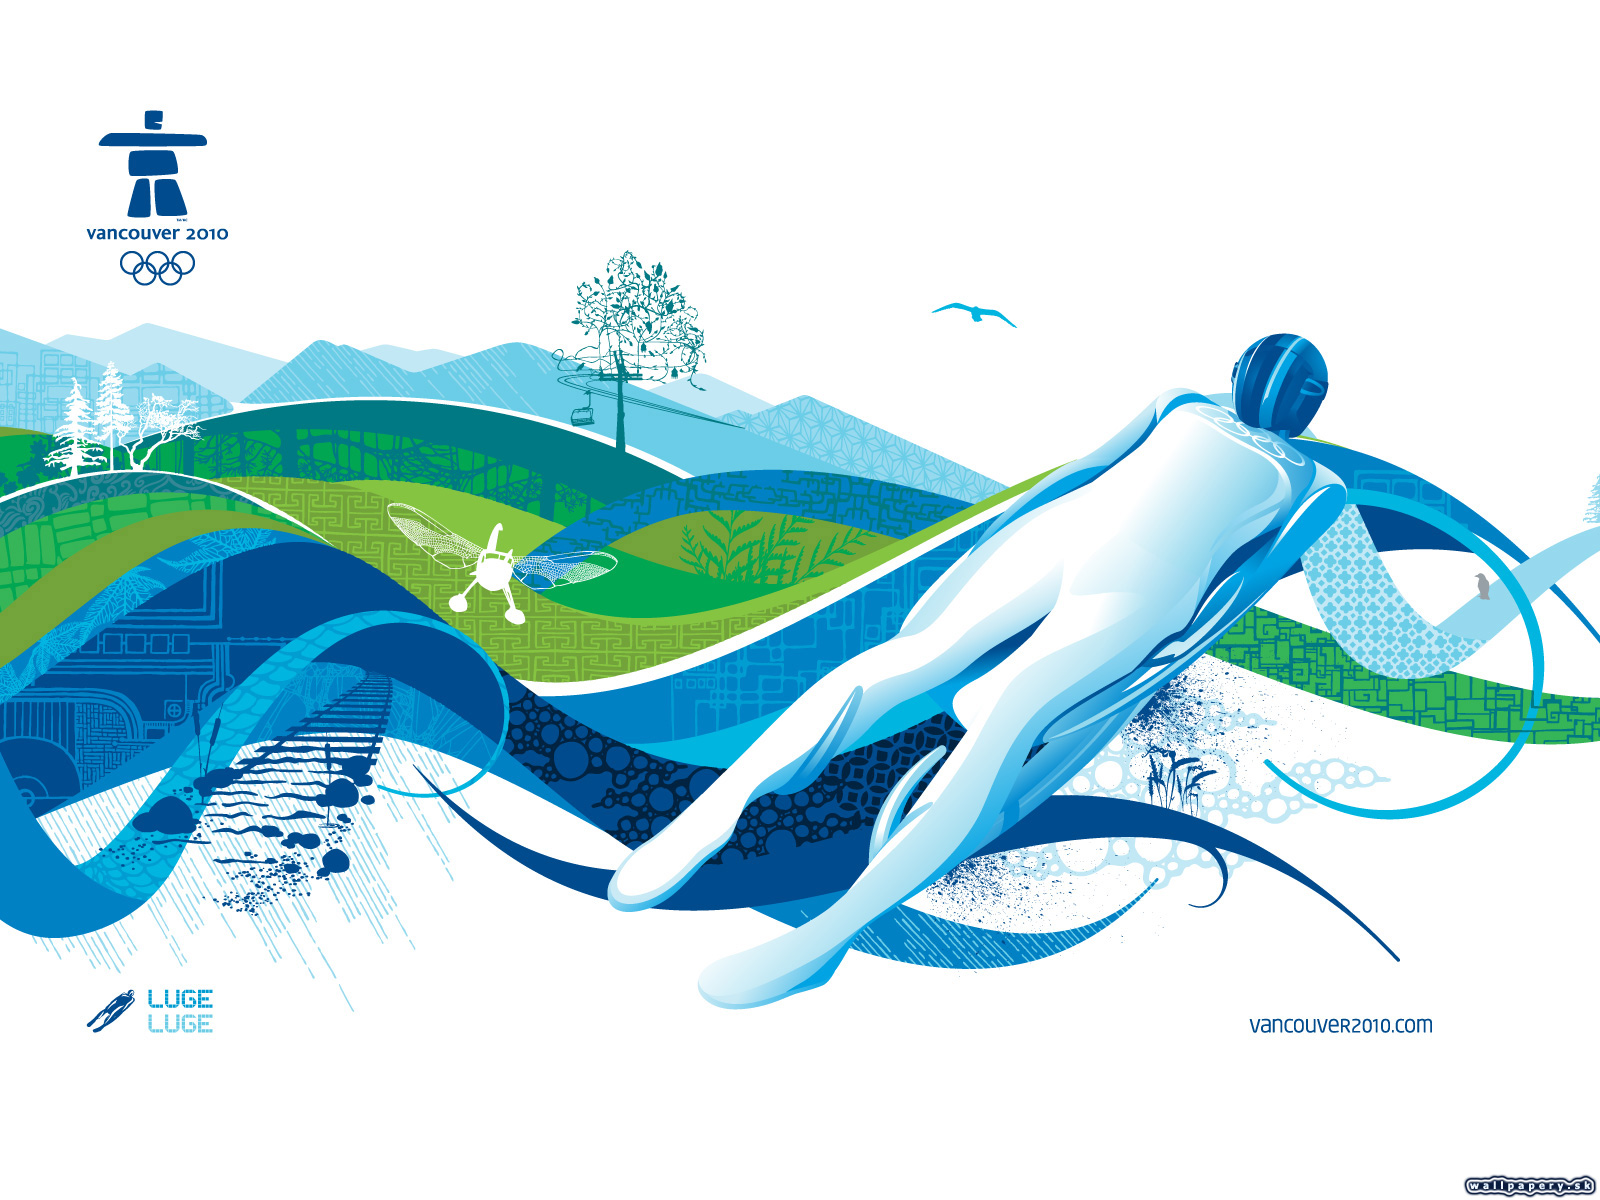 Vancouver 2010 - The Official Video Game of the Olympic Winter Games - wallpaper 16